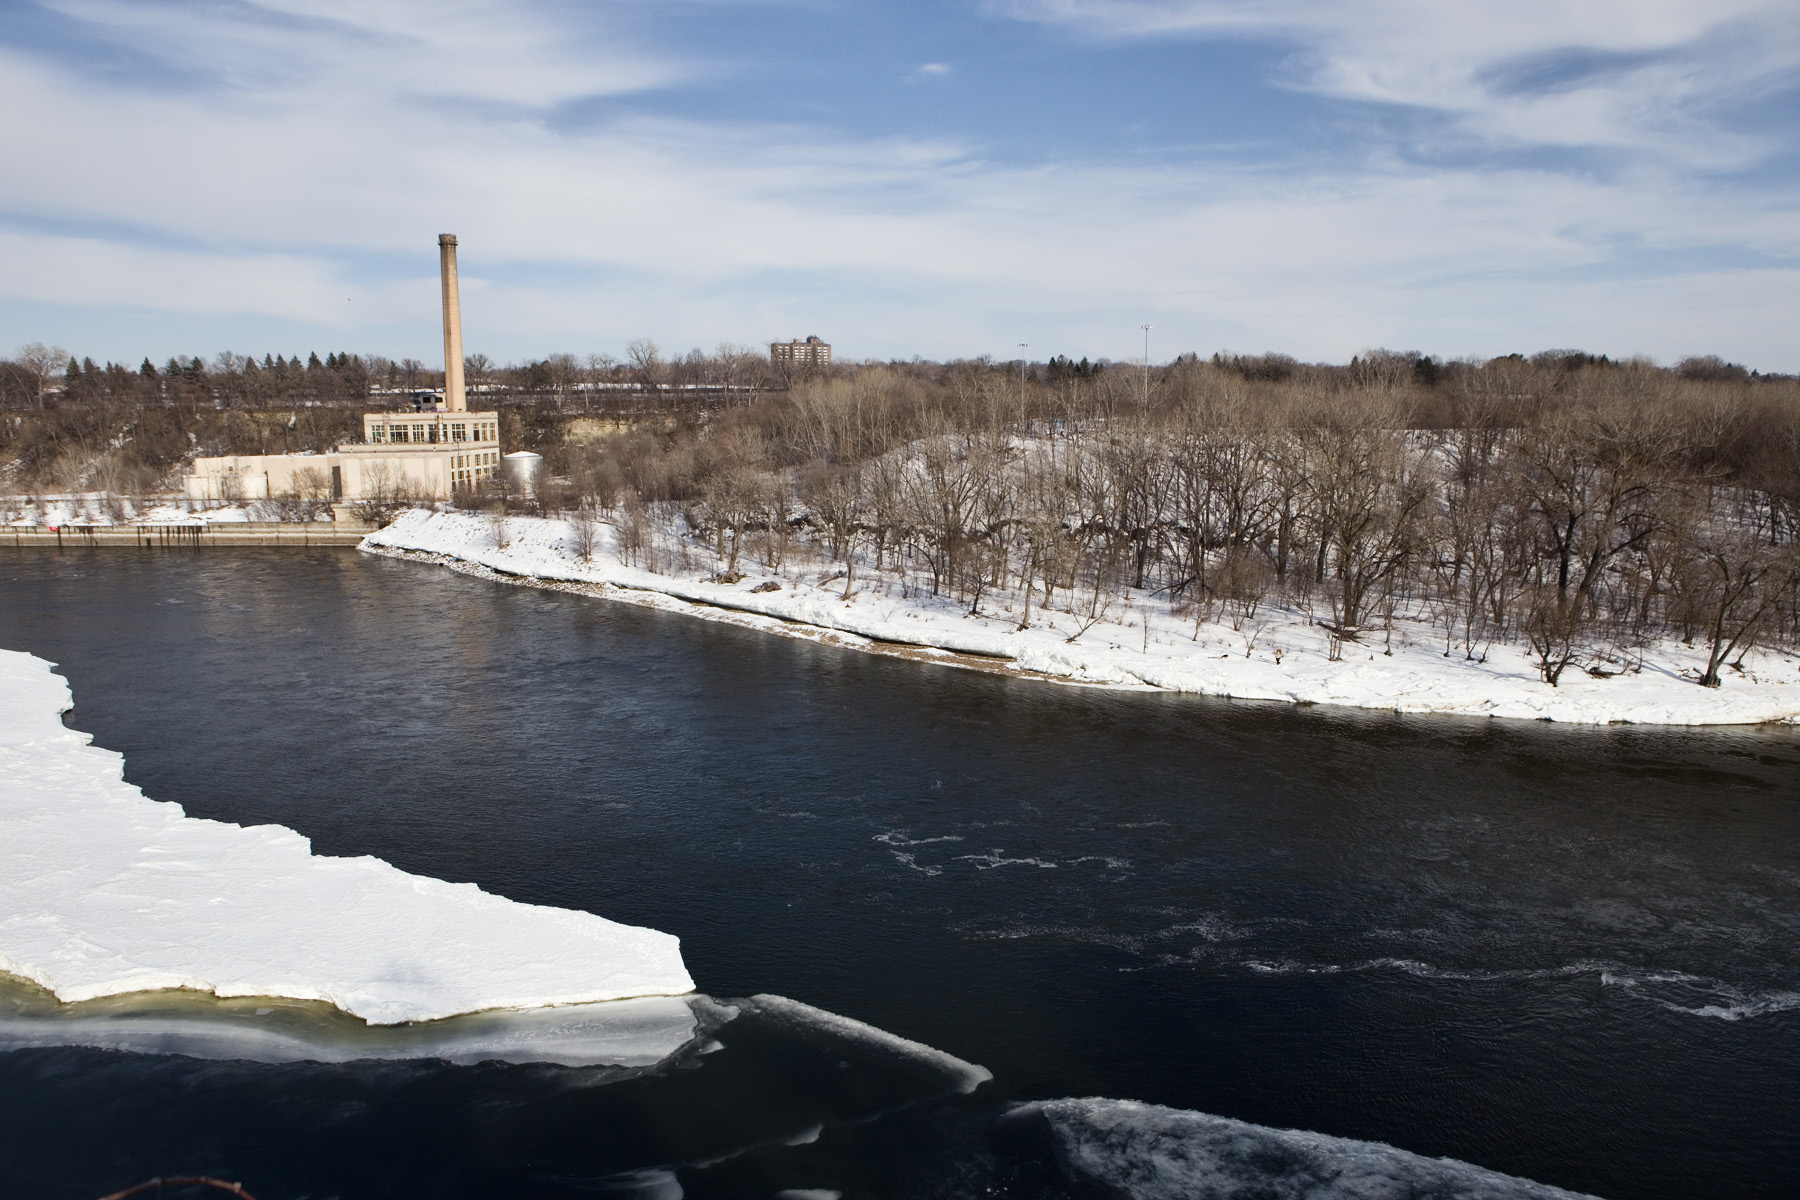 River and Ford plant in winter